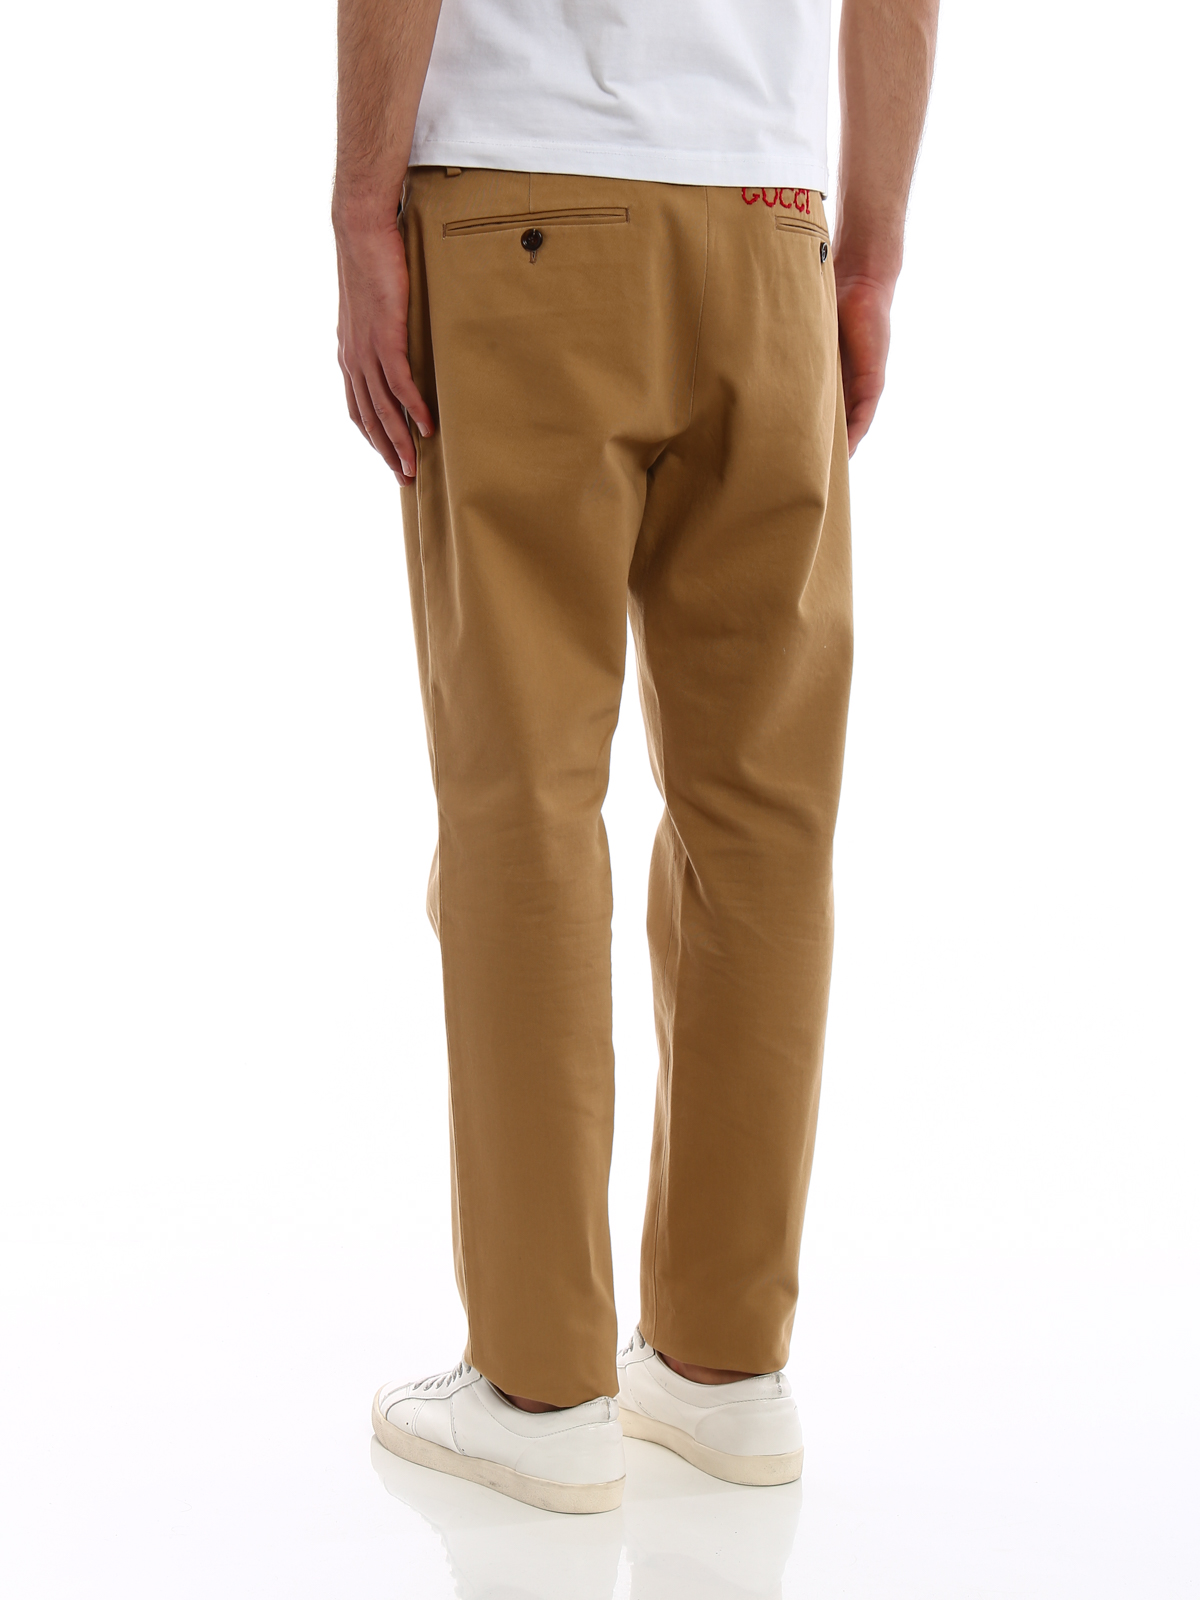 Gnide fjende Hende selv Casual trousers Gucci - Beige cotton drill chino trousers - 519546Z396H9813